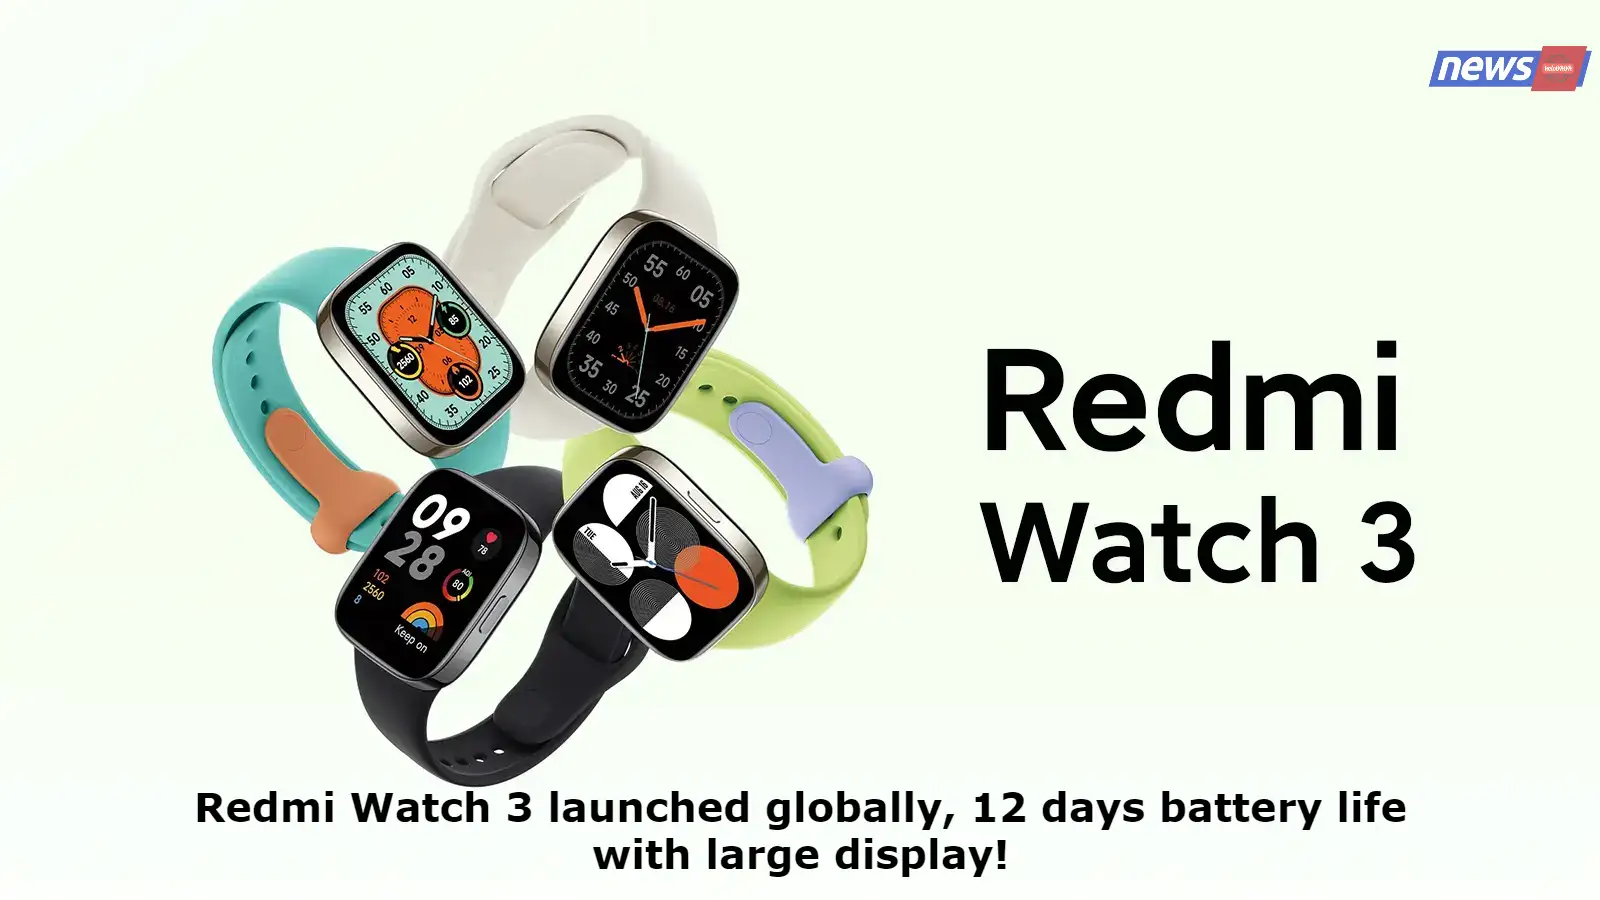 Redmi Watch 3 launched globally, 12 days battery life with large display!